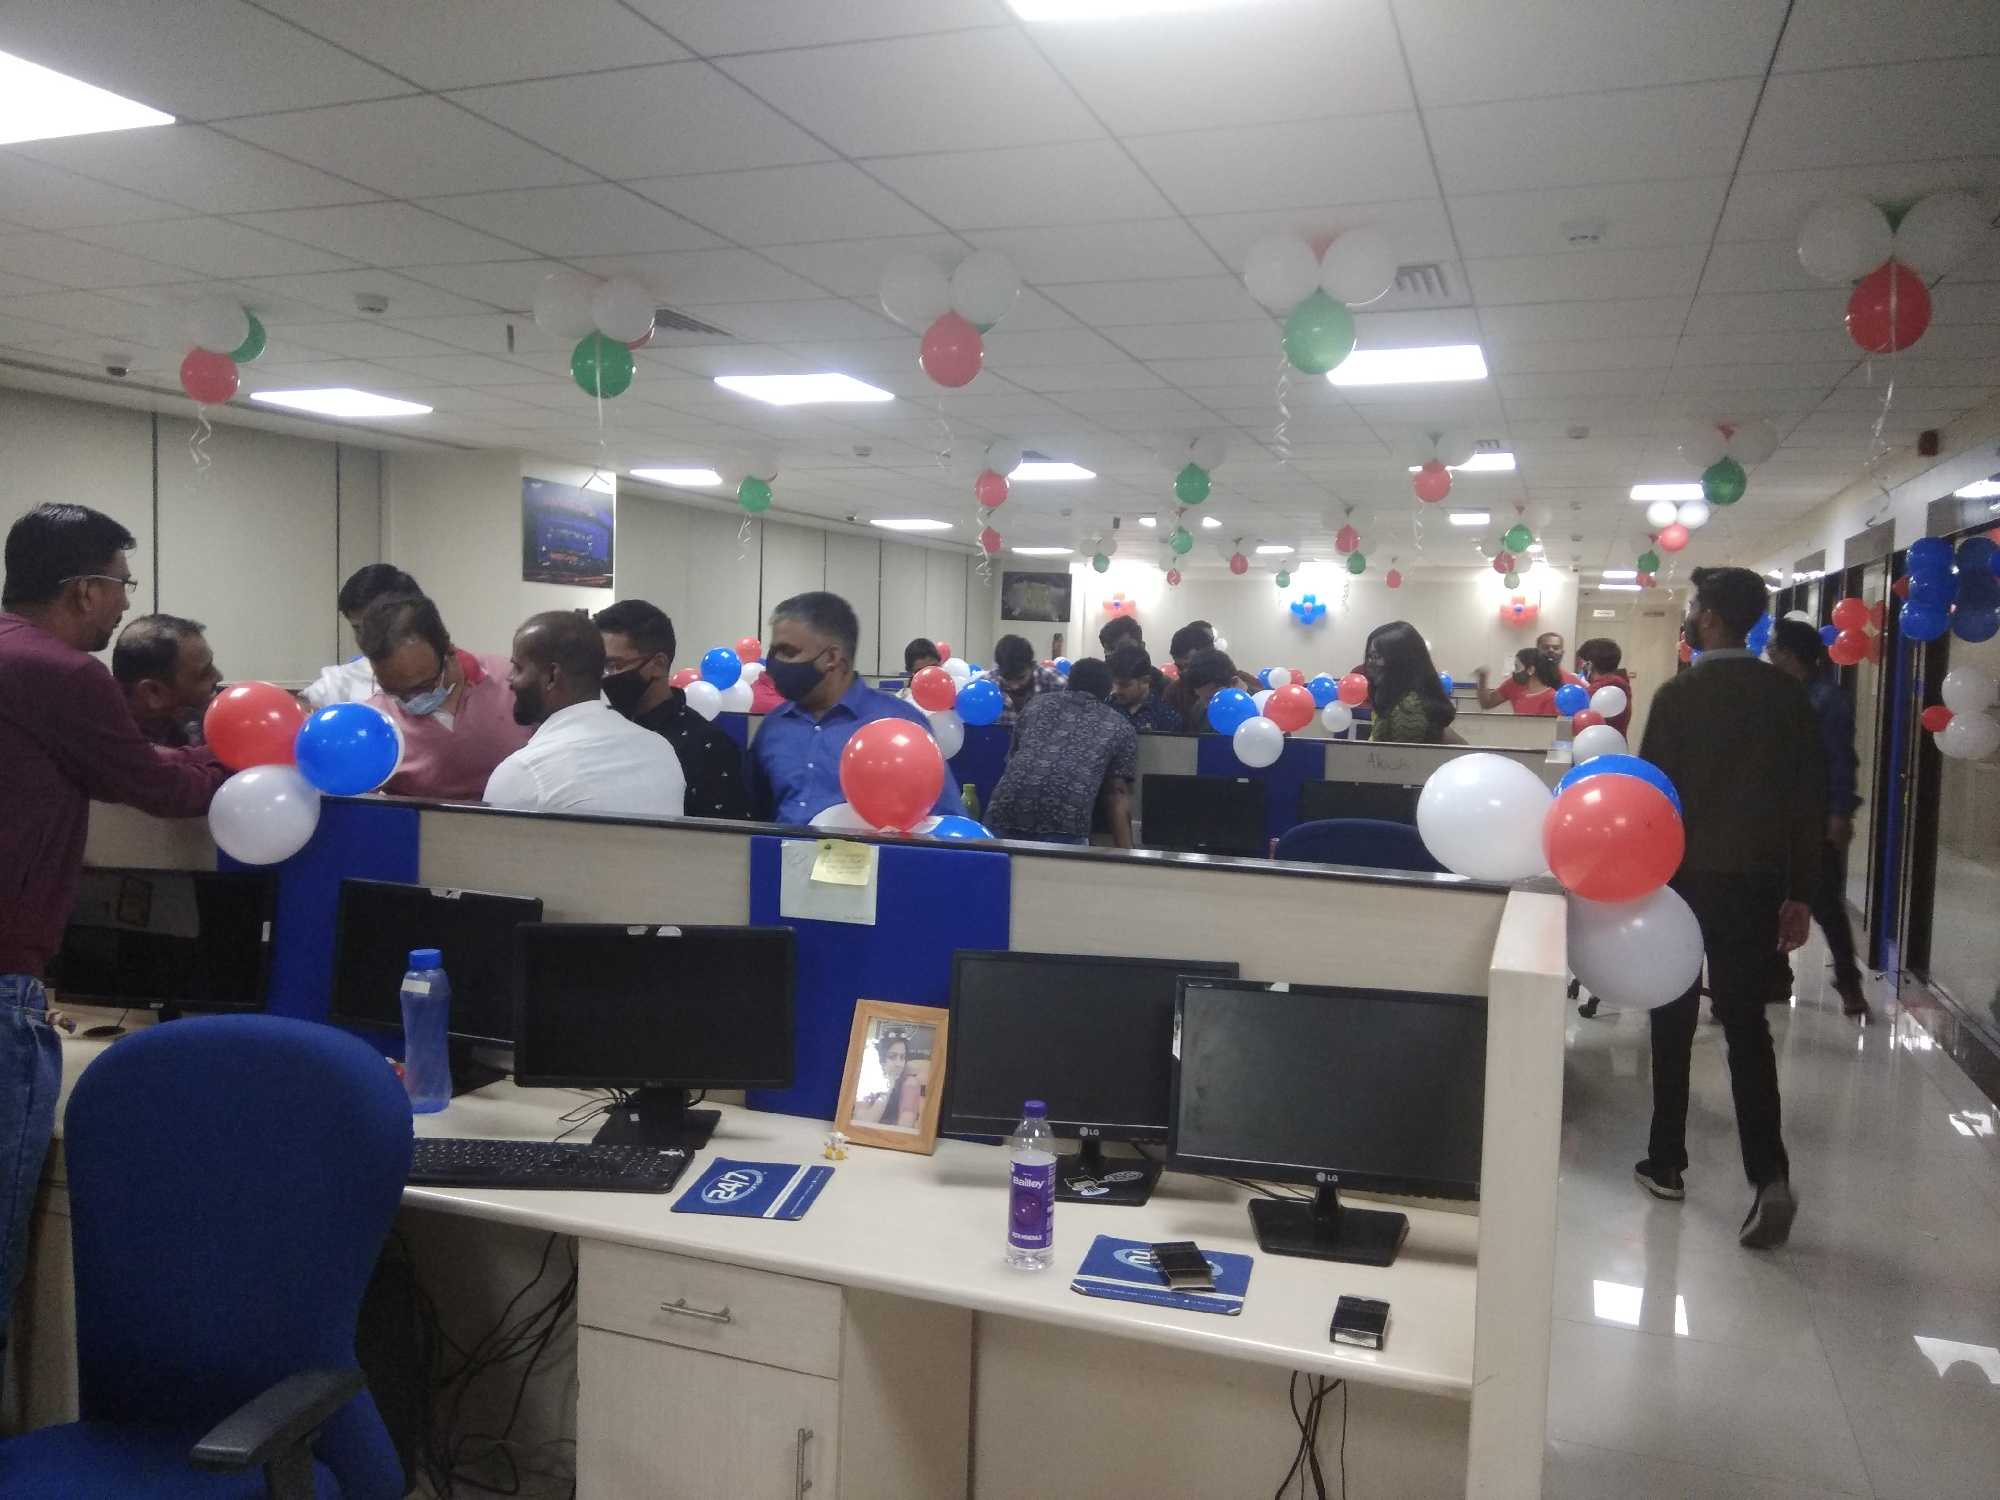 24/7 office decorated with balloons